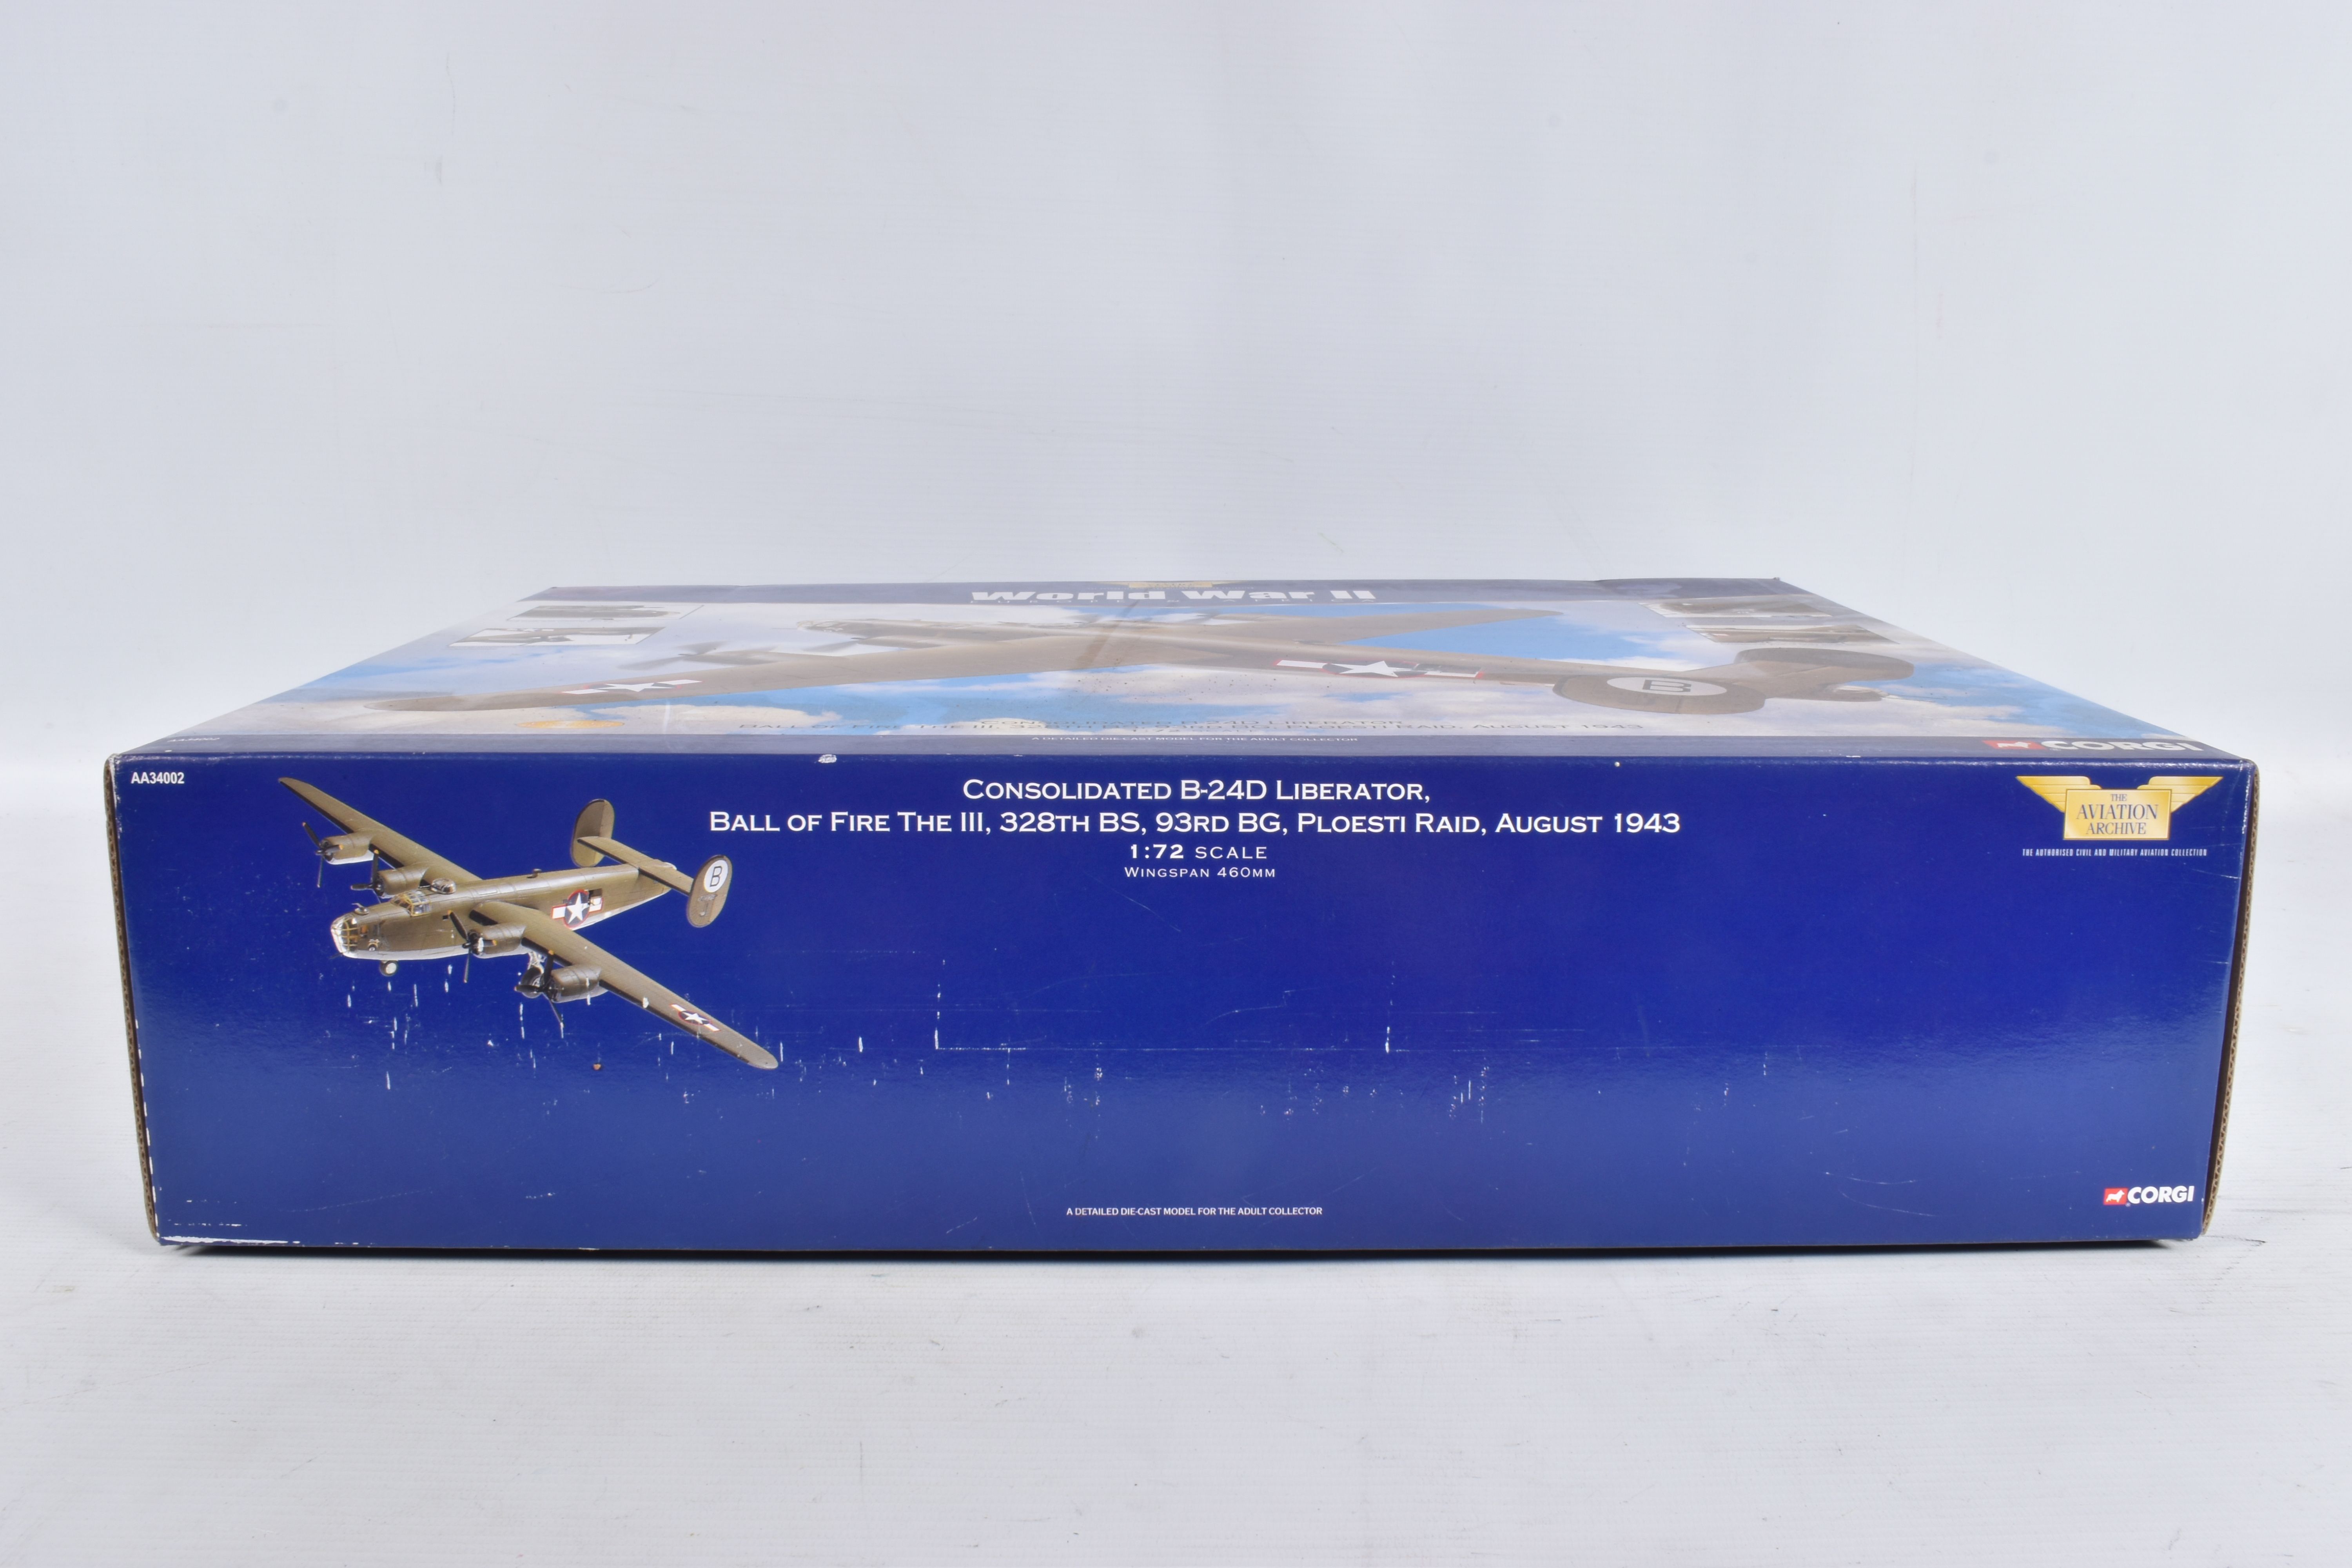 A BOXED CORGI AVIATION ARCHIVE WORLD WAR II EUROPE & AFRICA CONSOLIDATED B-24D LIBERATOR 1:72 - Image 2 of 8